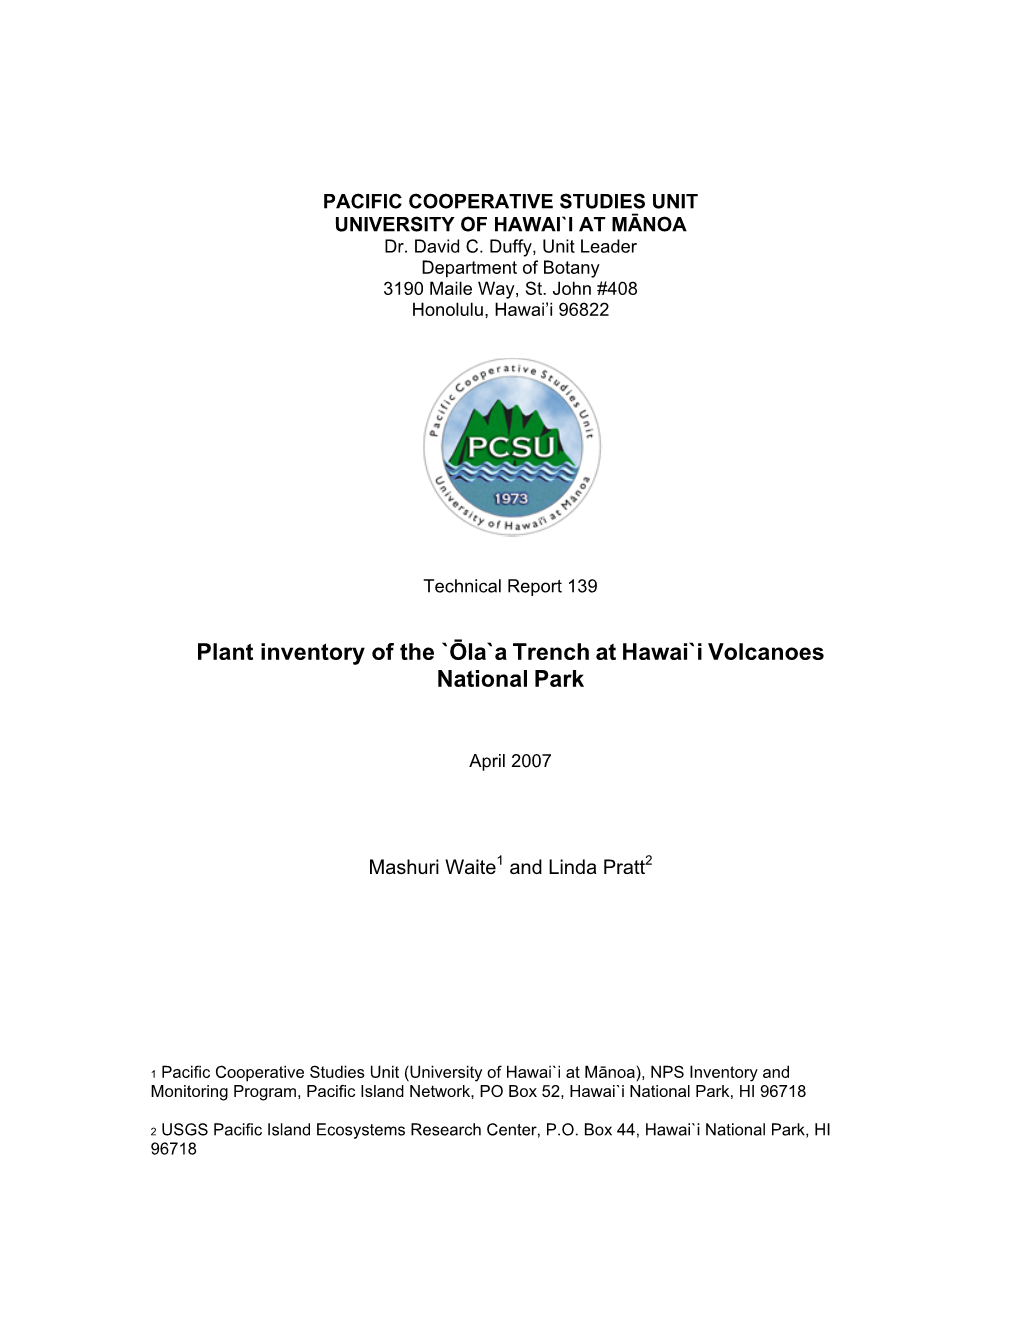 Plant Inventory of the `Ōla`A Trench at Hawai`I Volcanoes National Park